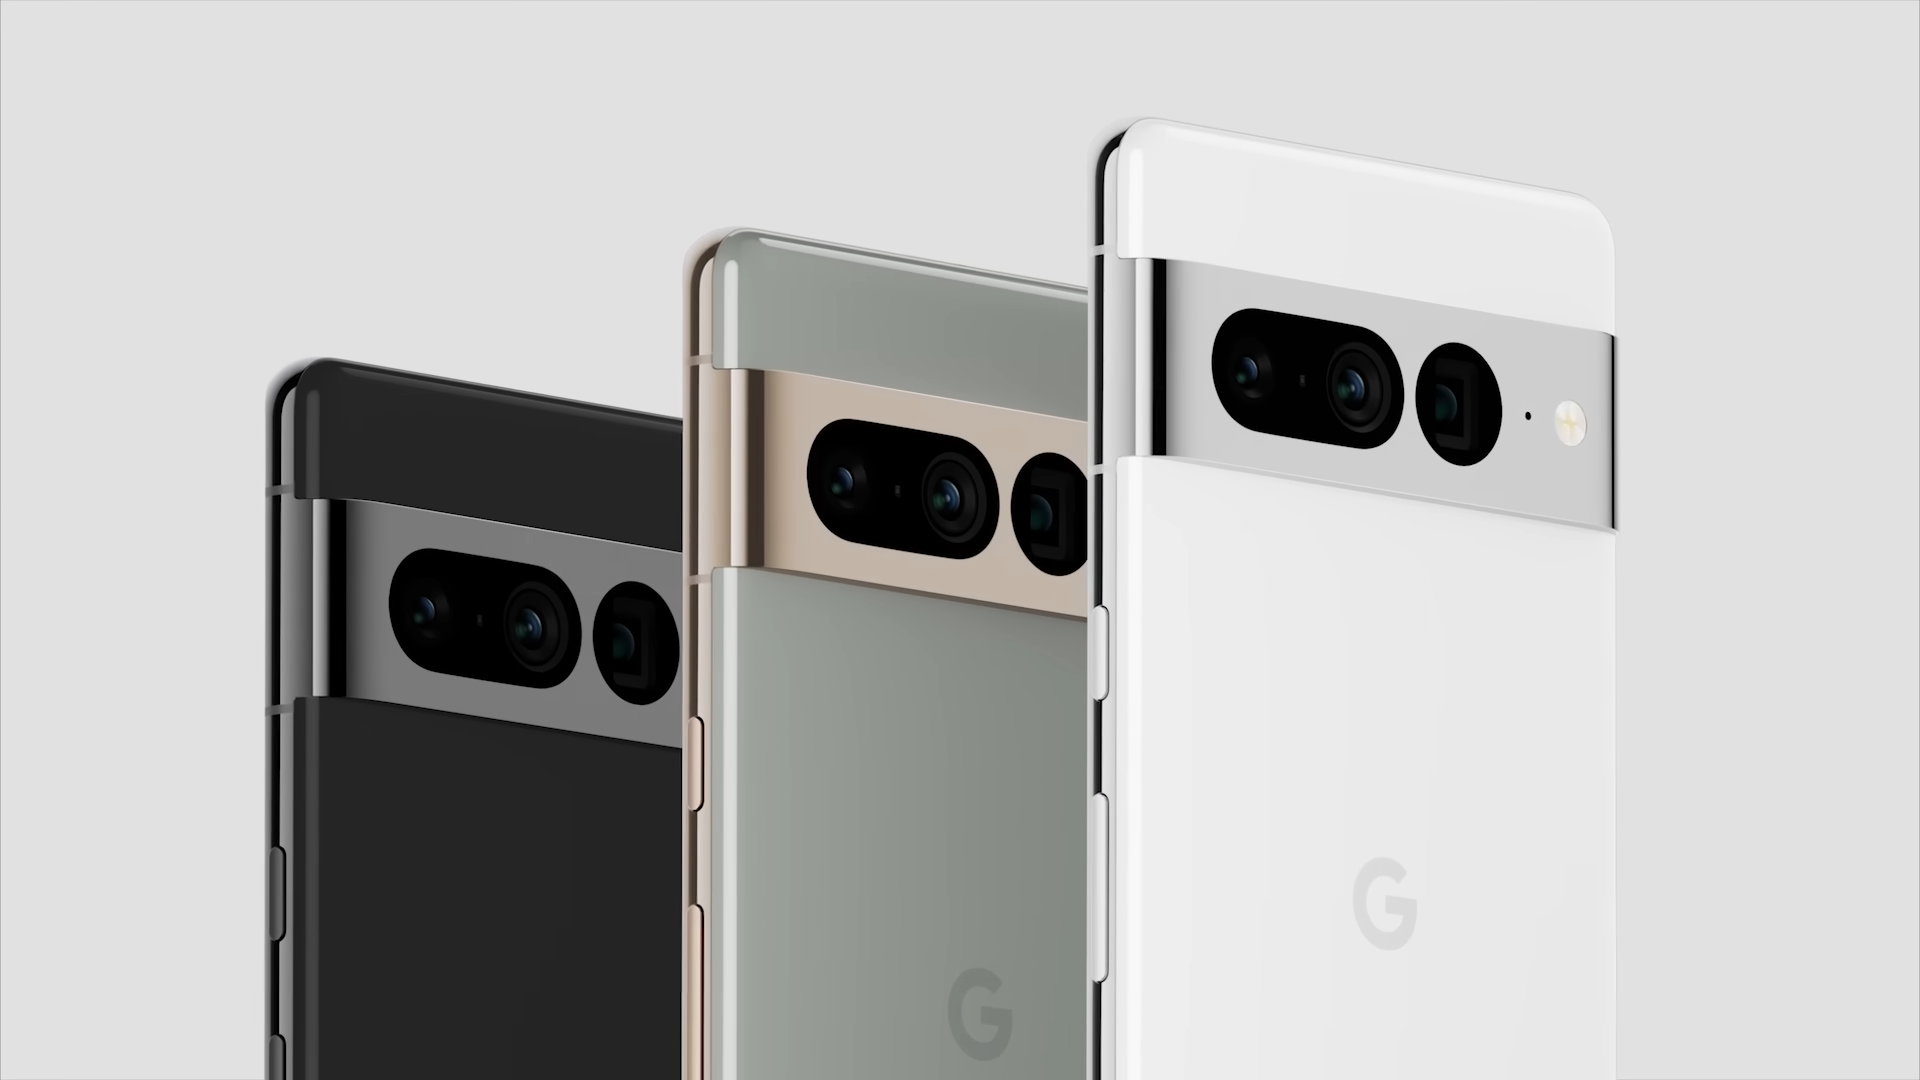 With the Pixel 7, ‘Pixel phone’ finally means something more than Android enthusiasm